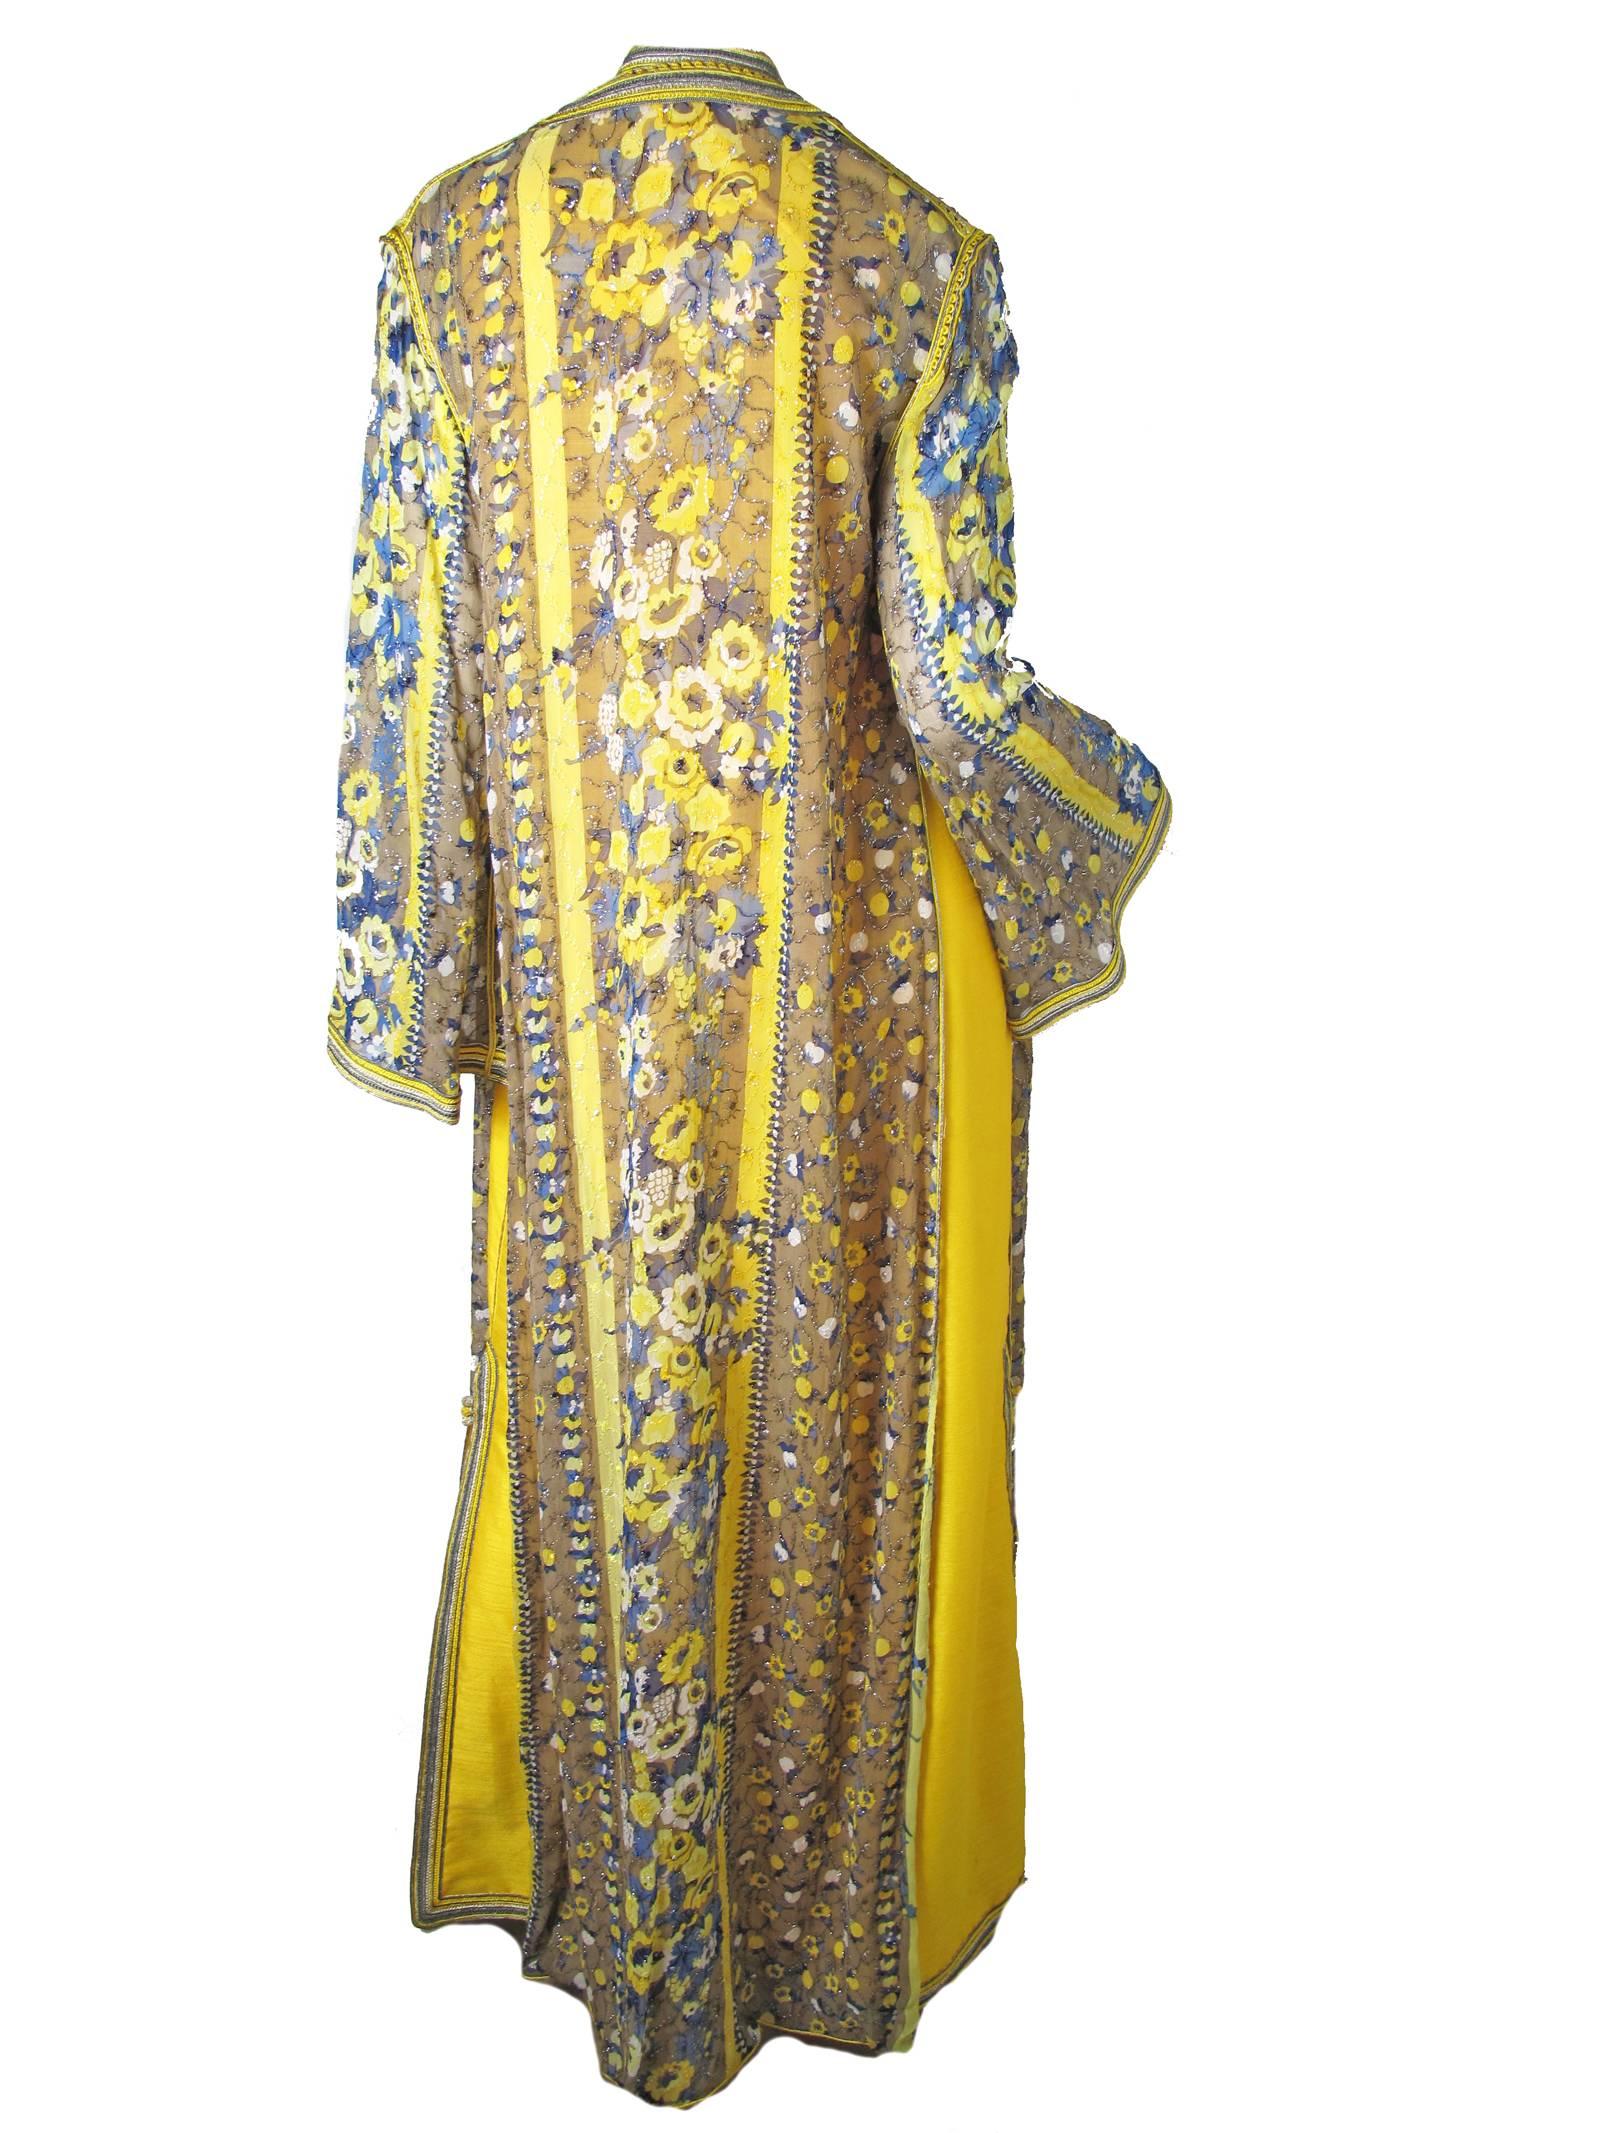 1960s Naima's caftan from Rabat Hilton Maroc.  Yellow sleeveless gown with side slits and crocheted buttons down front.  No fabric label, possible silk blend.  
Sheer chiffon floral over coat with hand embroidery. Size Large

Condition: Yellow